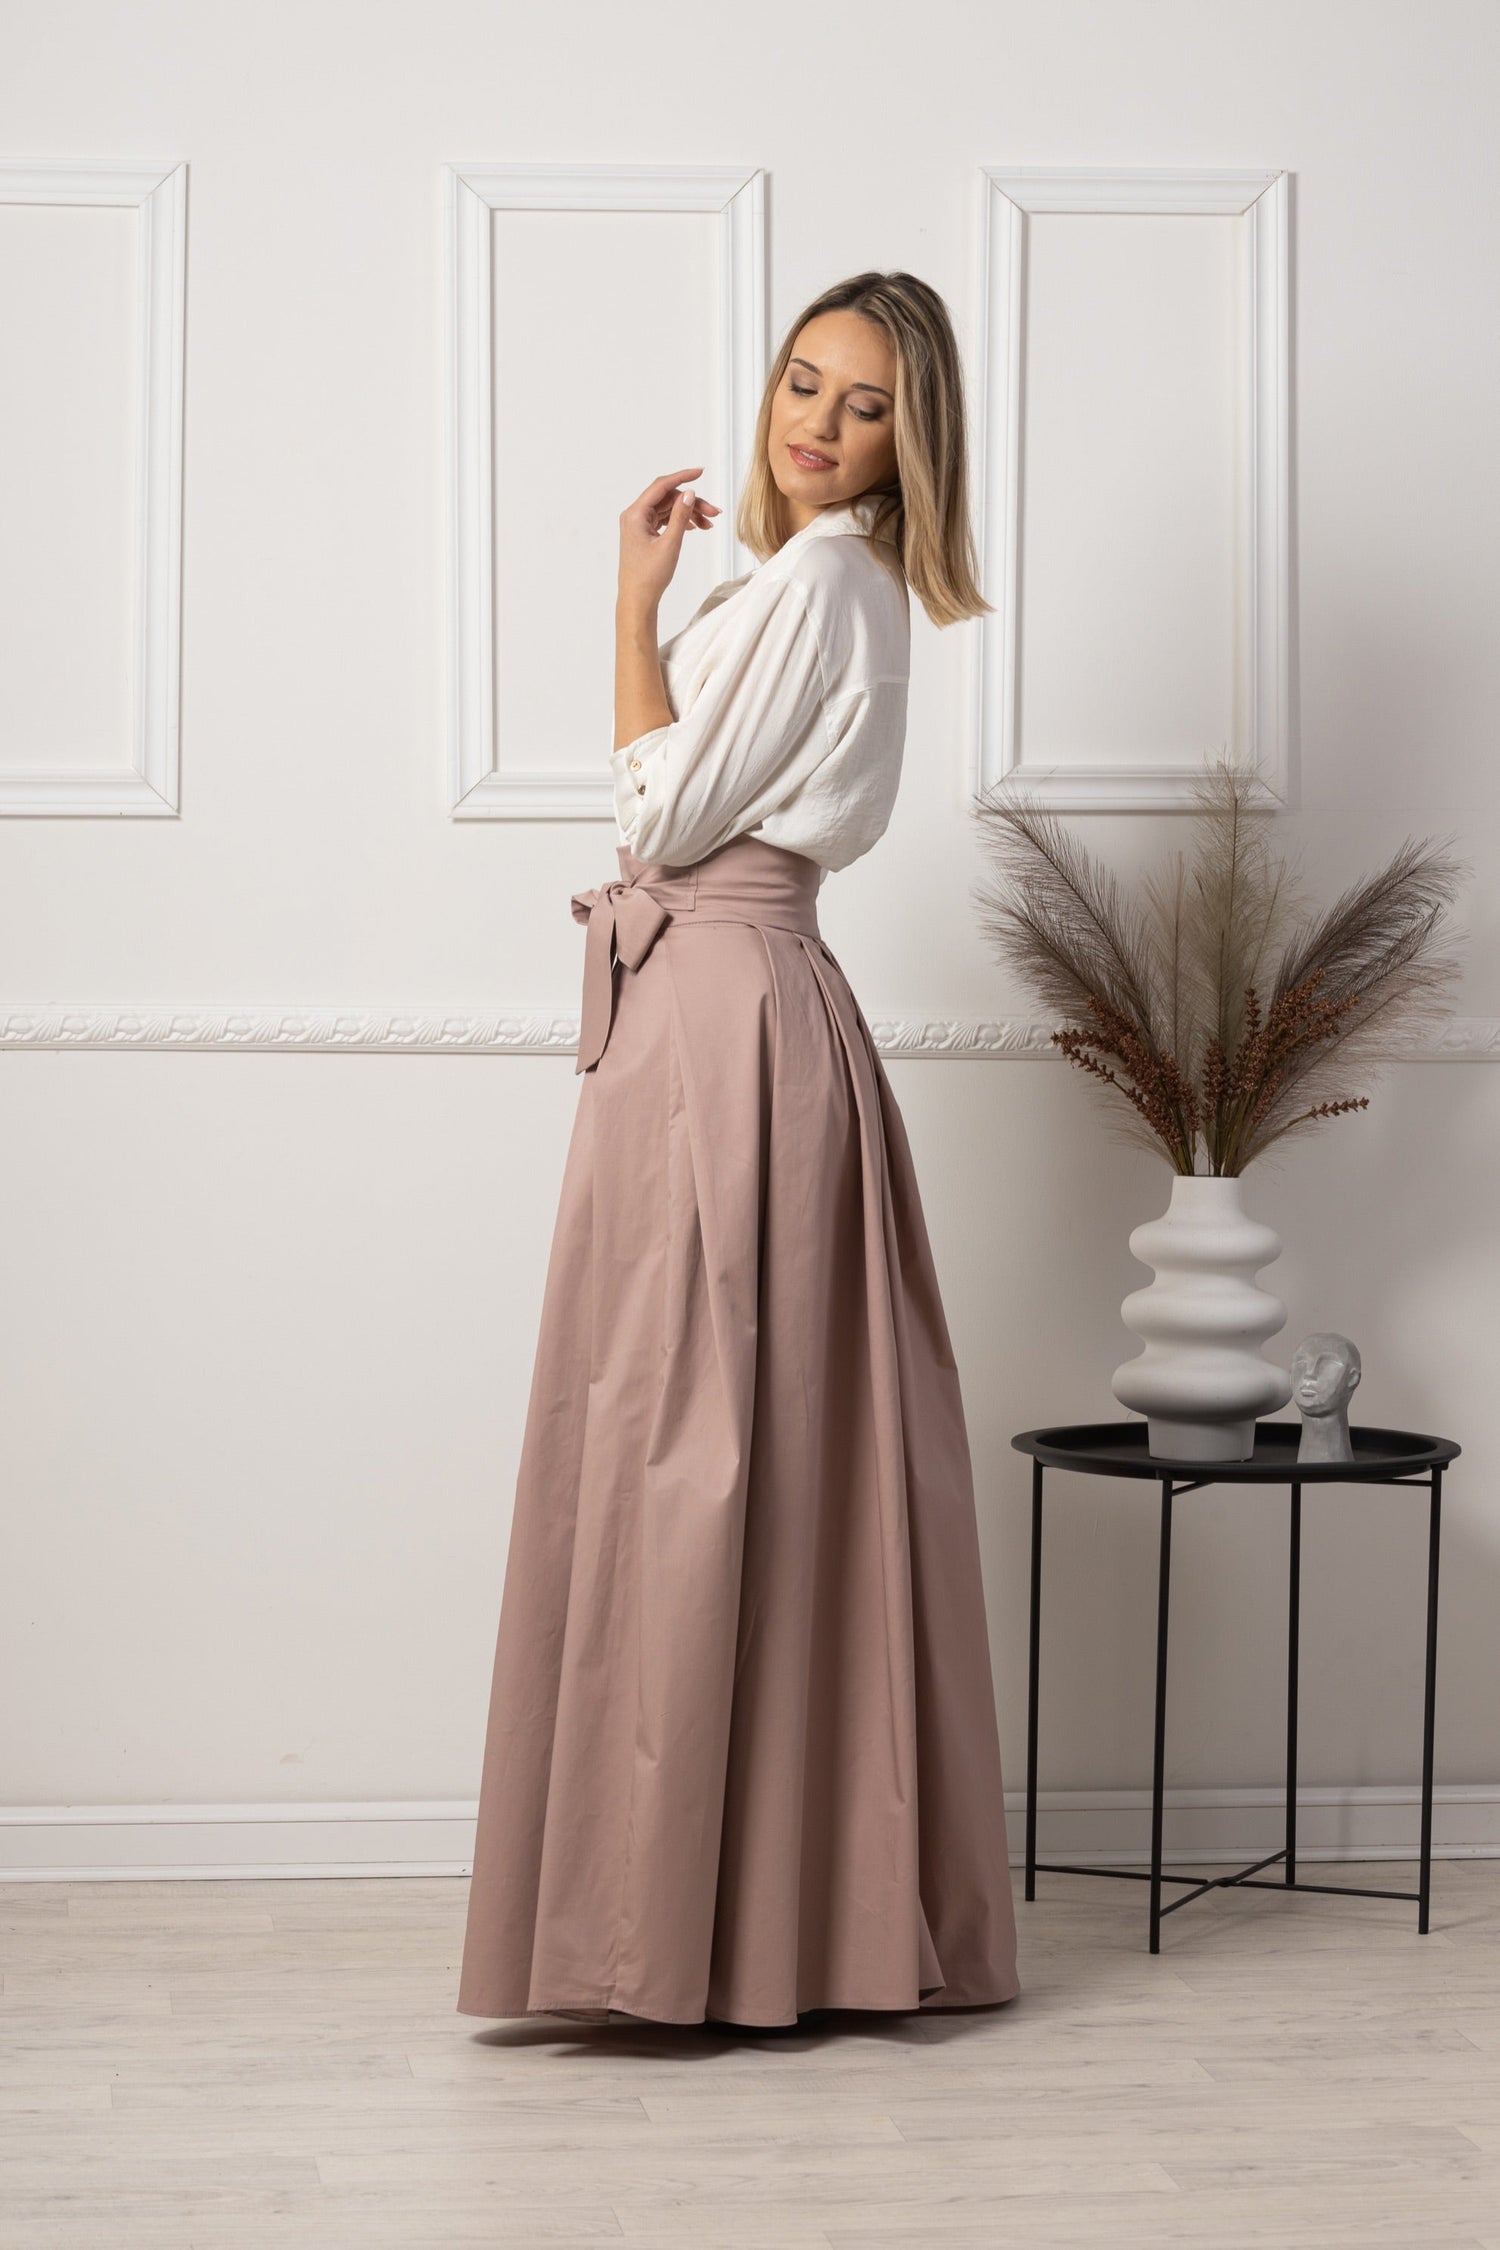 Black High Waist Pleated Maxi Skirt with front pockets - from NikkaPlace | Effortless fashion for easy living